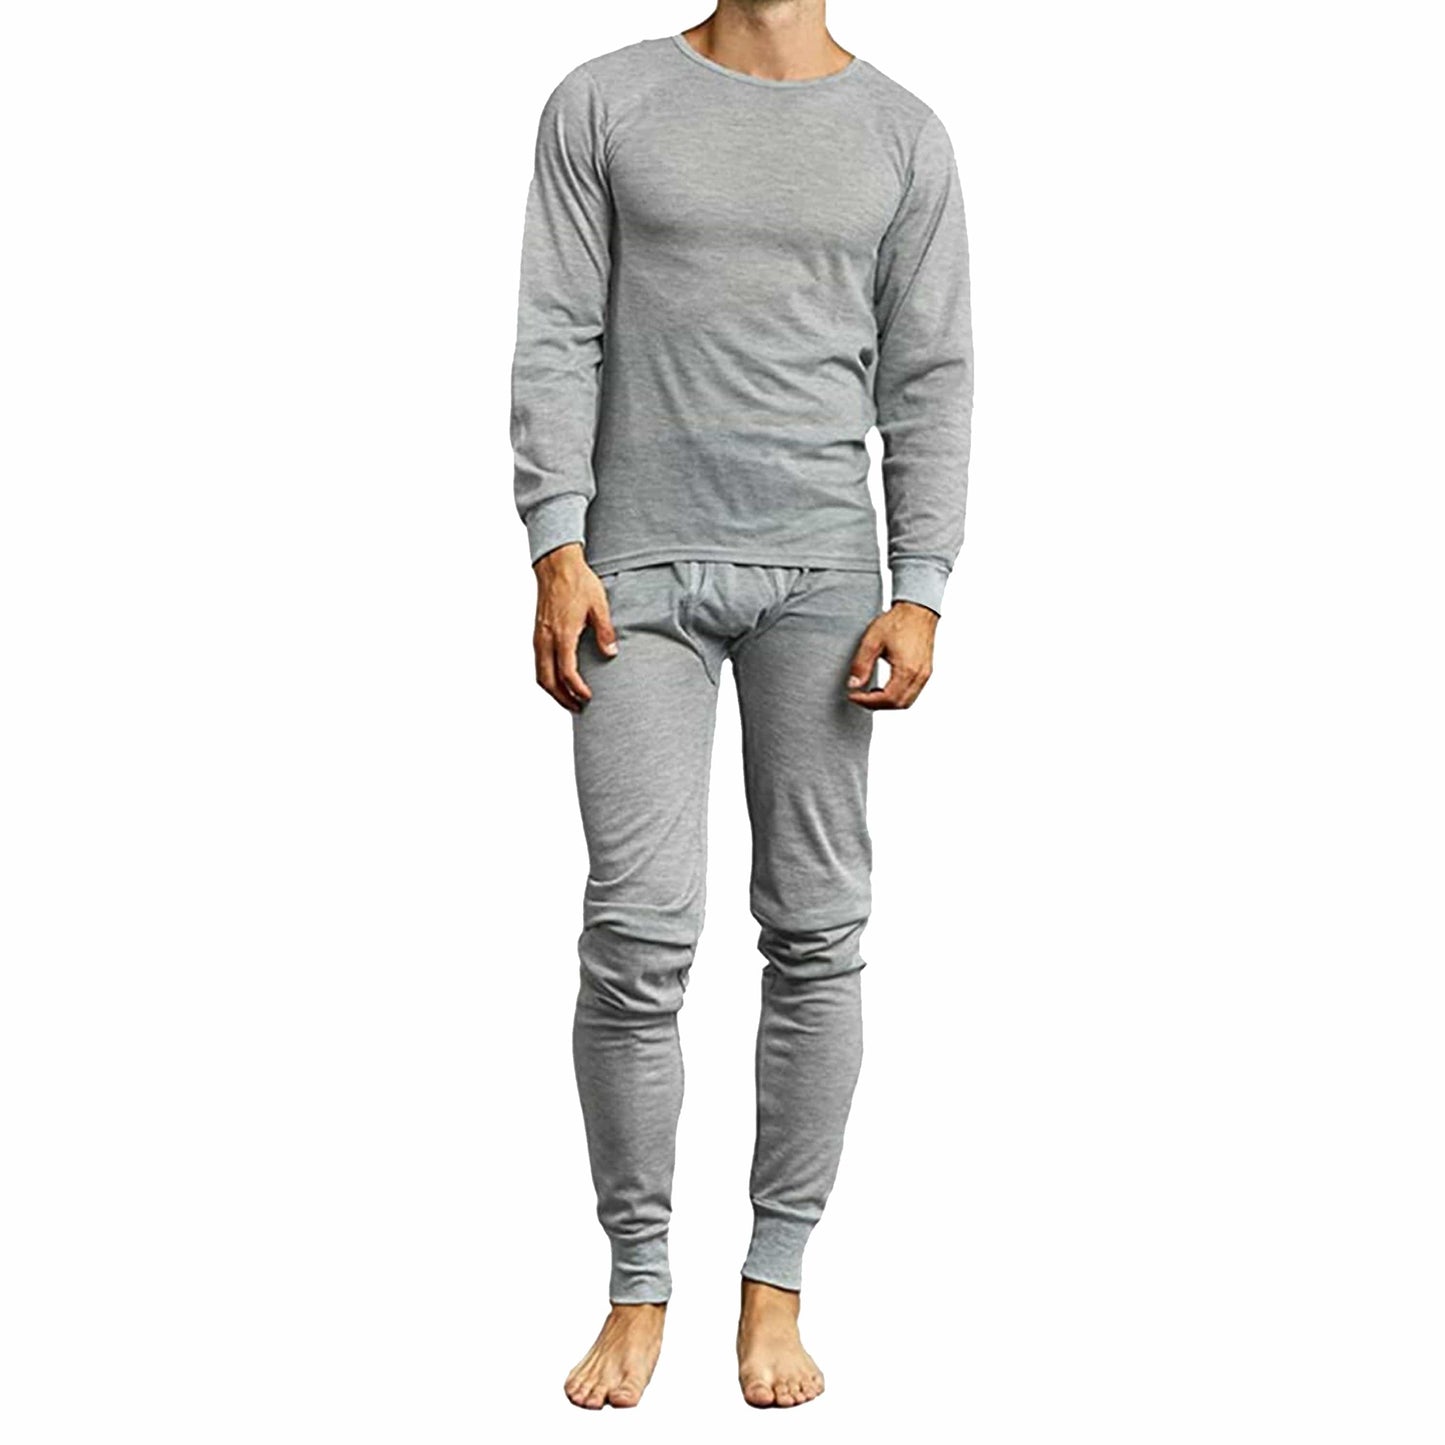 2-Piece Lightweight Thermal Set Of Both A Thermal Top And Bottom